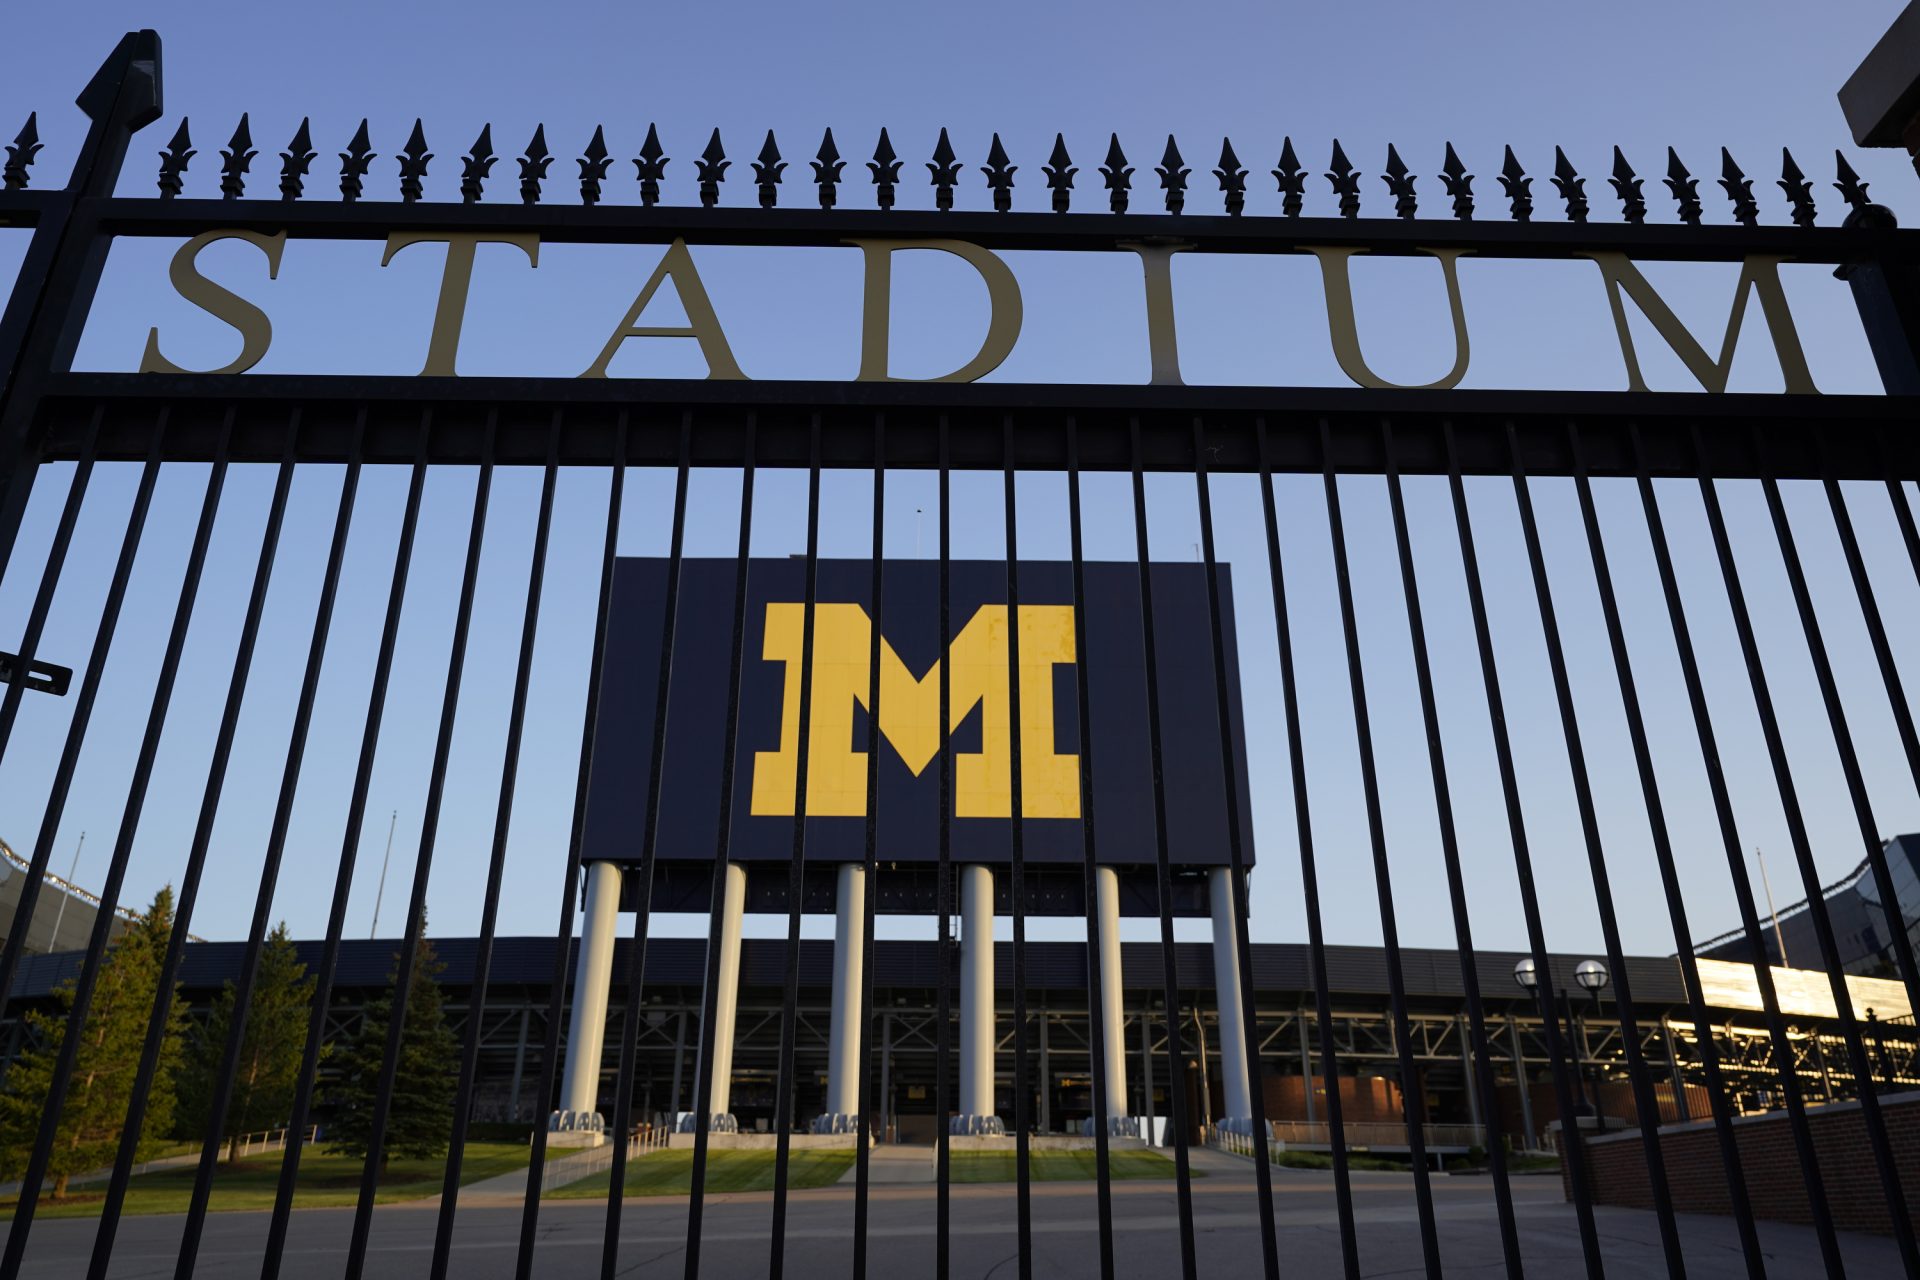 The University of Michigan football stadium is shown in Ann Arbor, Mich., Thursday, Aug. 13, 2020. A crumbling college football season took a massive hit Aug. 11, when the Big Ten and Pac-12, two historic and powerful conferences, succumbed to the COVID-19 pandemic and canceled their fall football seasons.